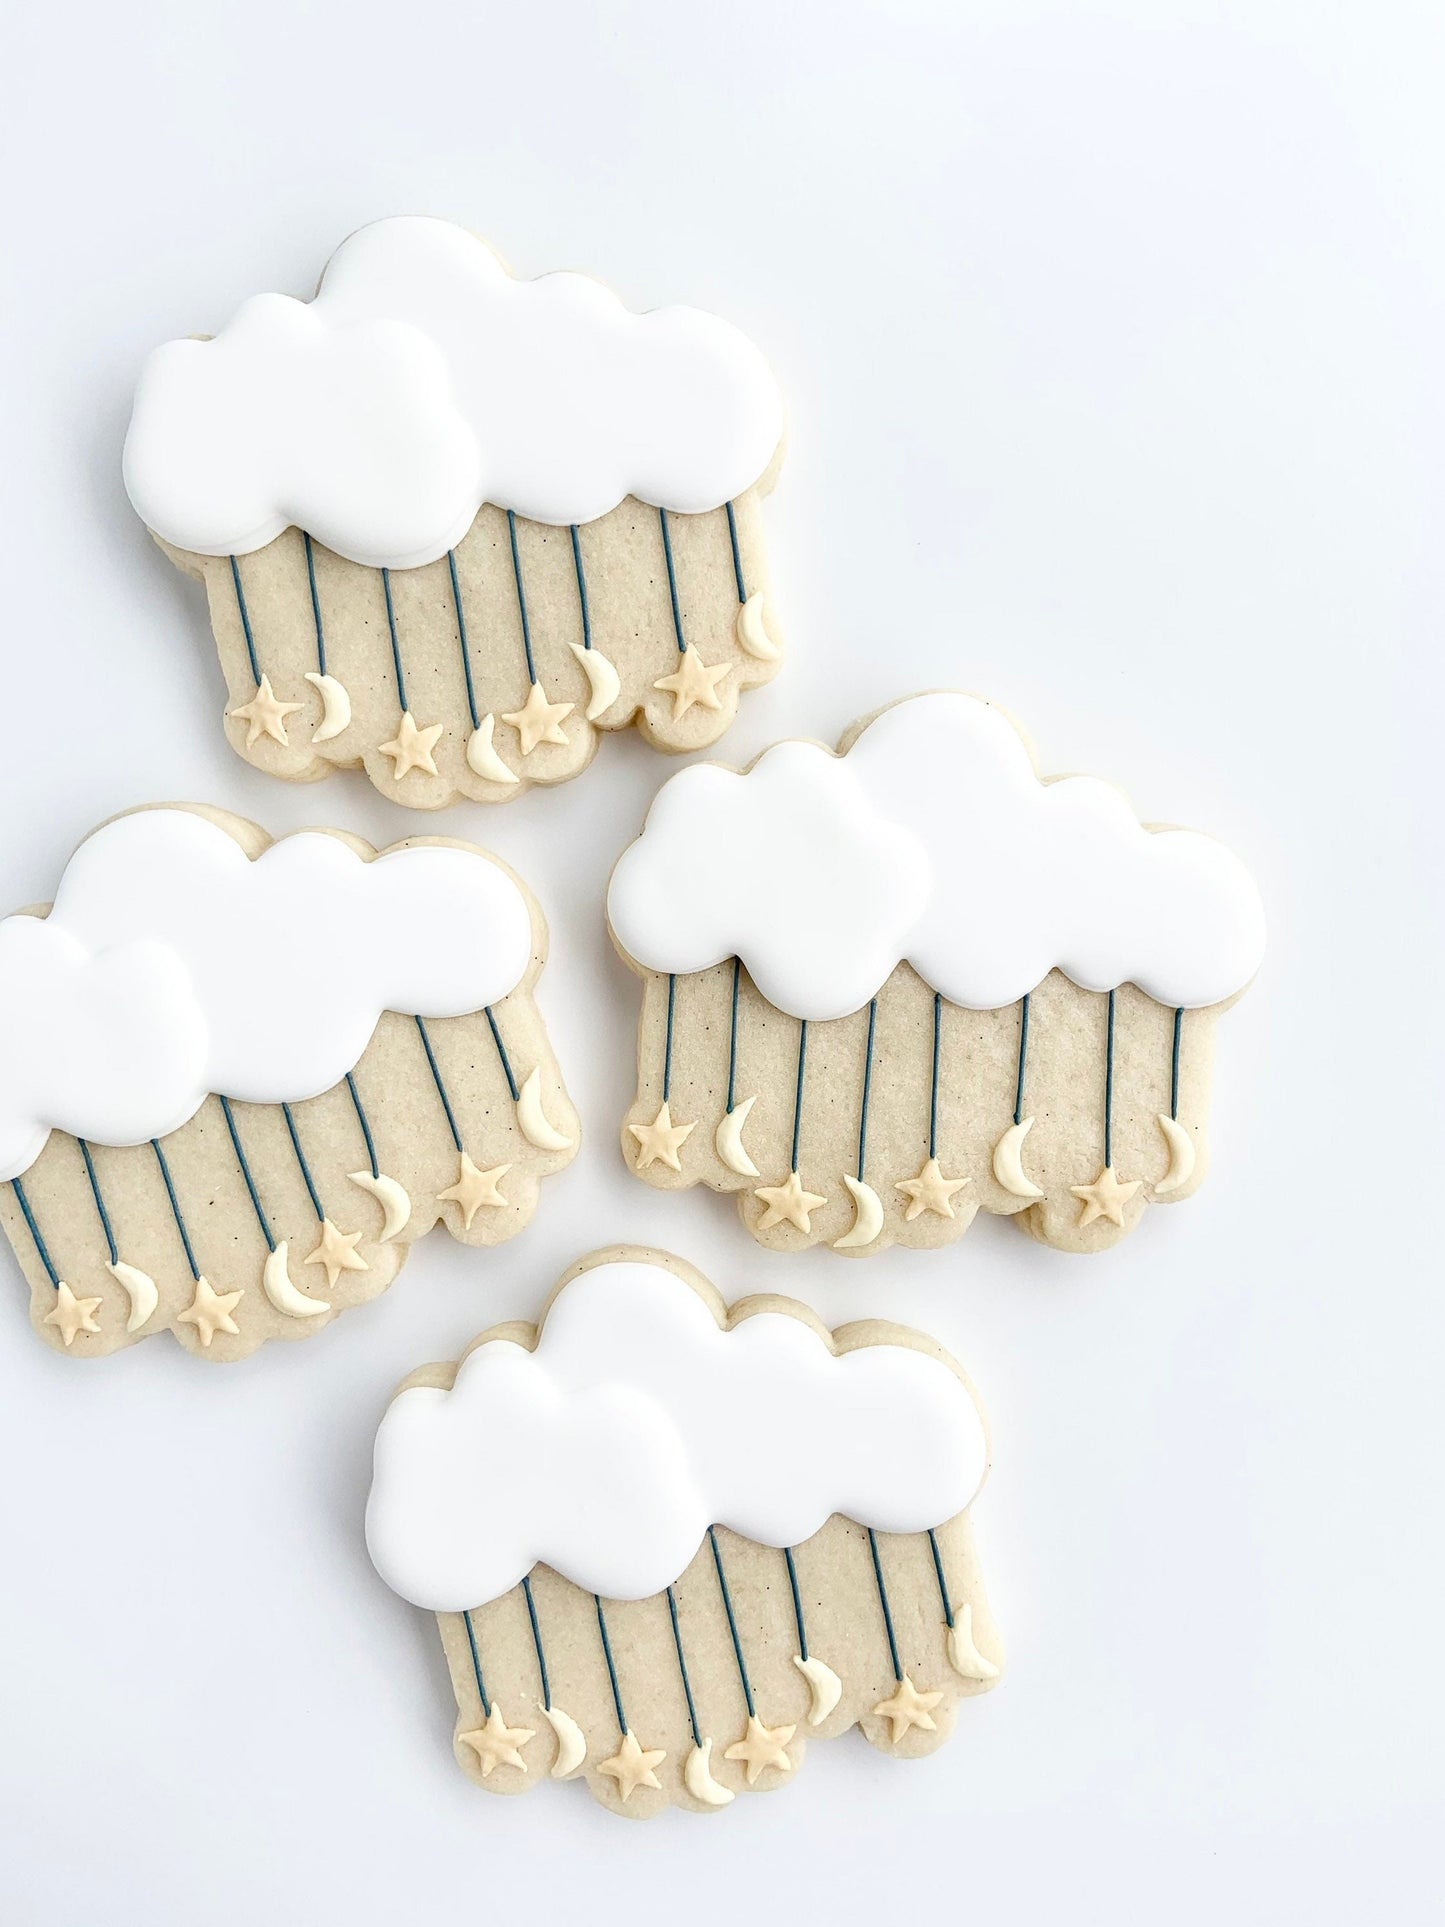 Cloud or Cloud with Rain Cookie Cutter